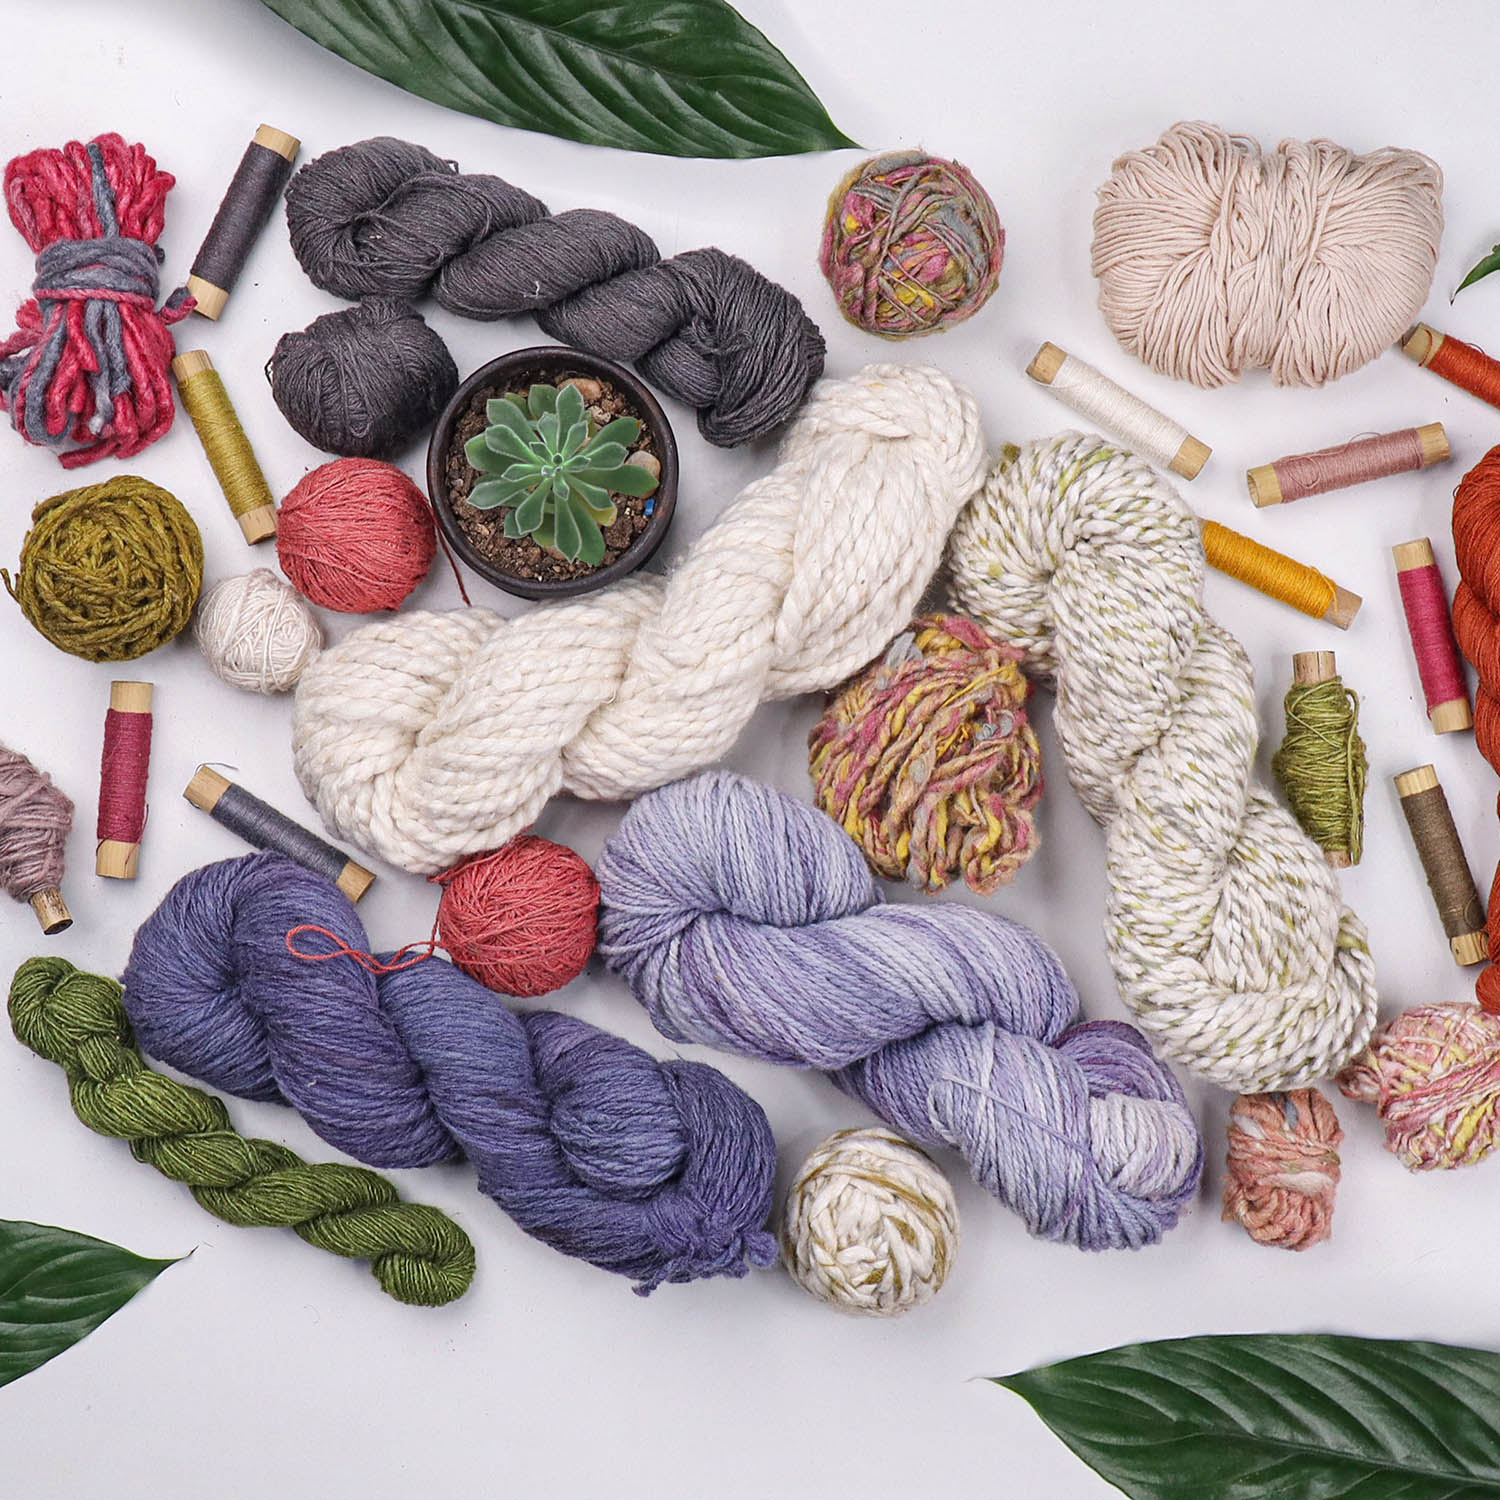 How to Select Yarn For Knitting? How to Select Yarn For Crochet? – Muezart  India